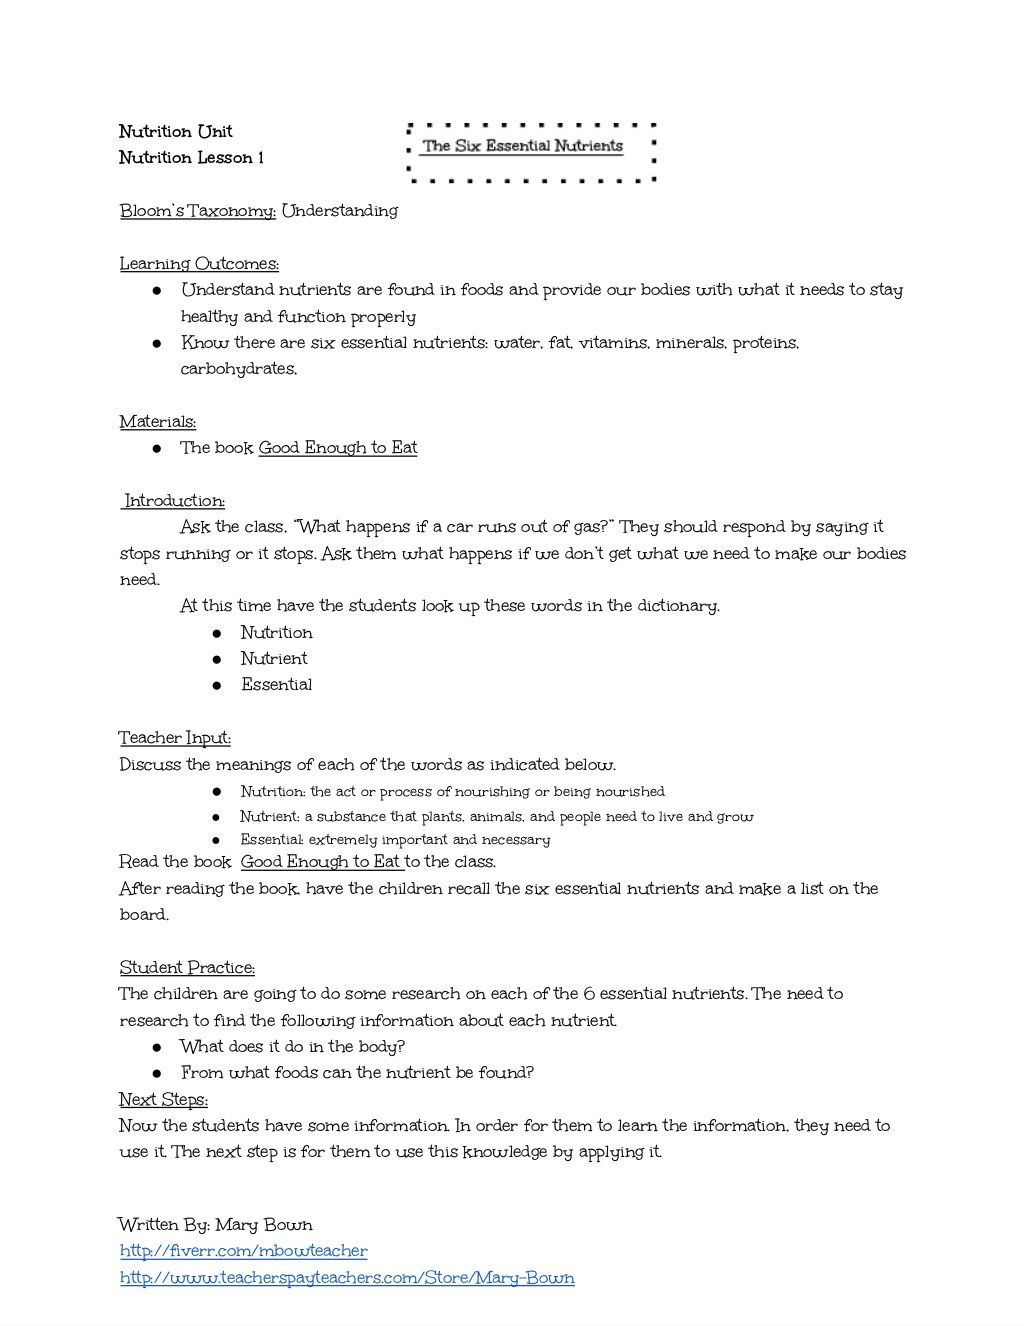 Nutrition Lesson Plans High School the Six Essential Nutrients Lesson Plan and Worksheet by